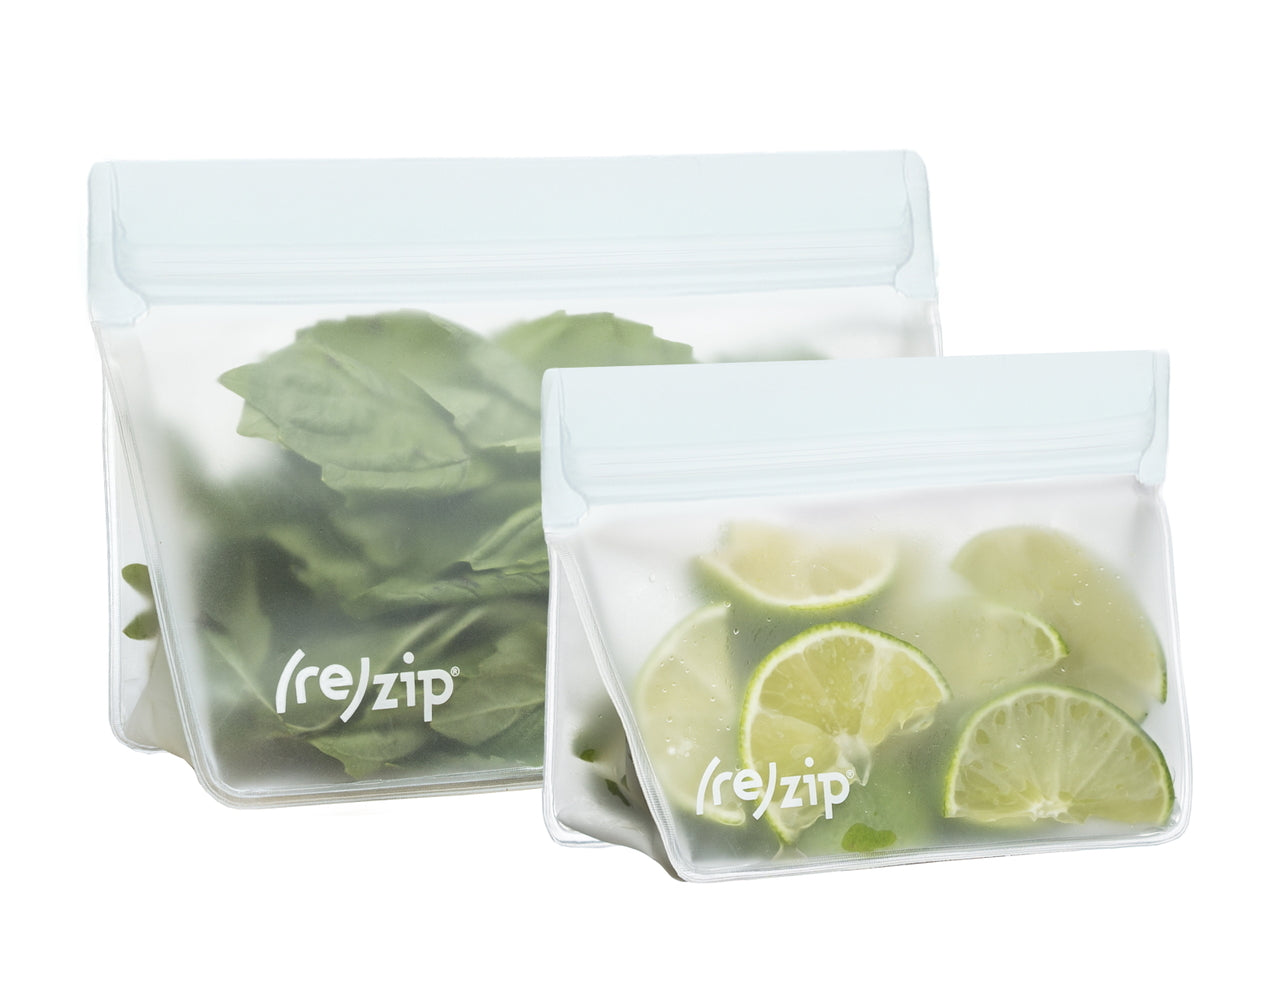 (re)zip - 1 Cup + 2 Cup Stand Up Storage Bags